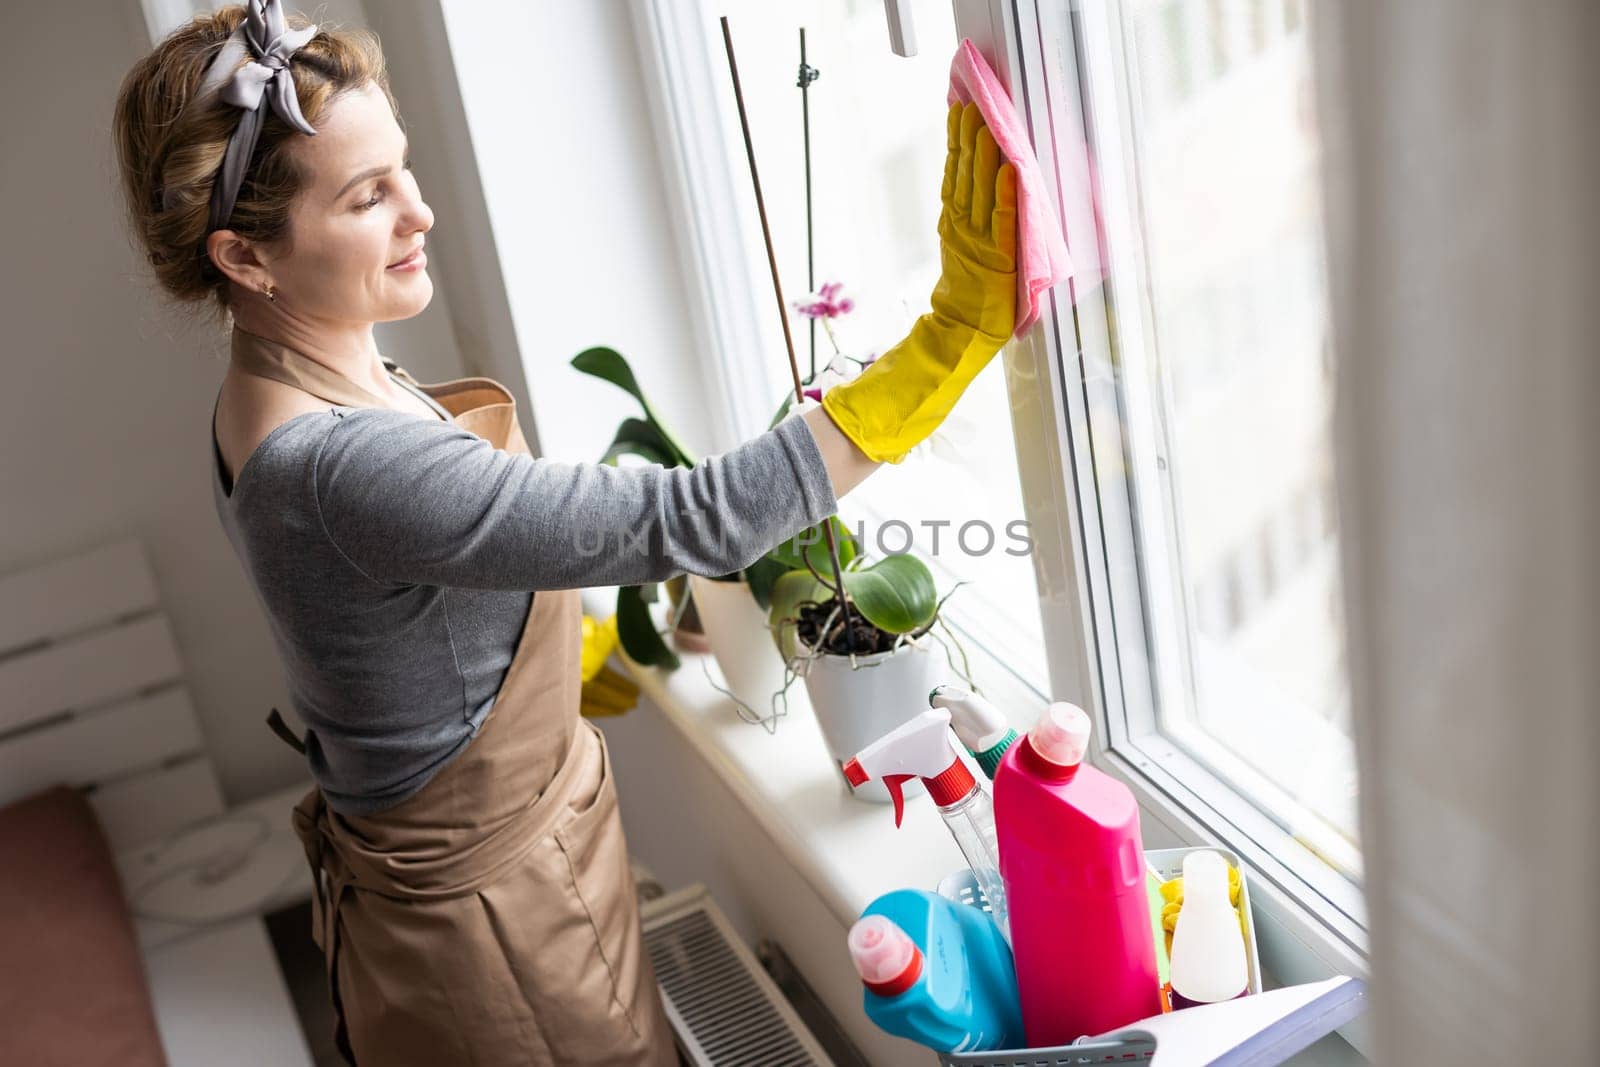 Woman cleaning and polishing the kitchen worktop with a spray detergent, housekeeping and hygiene concept. by Andelov13